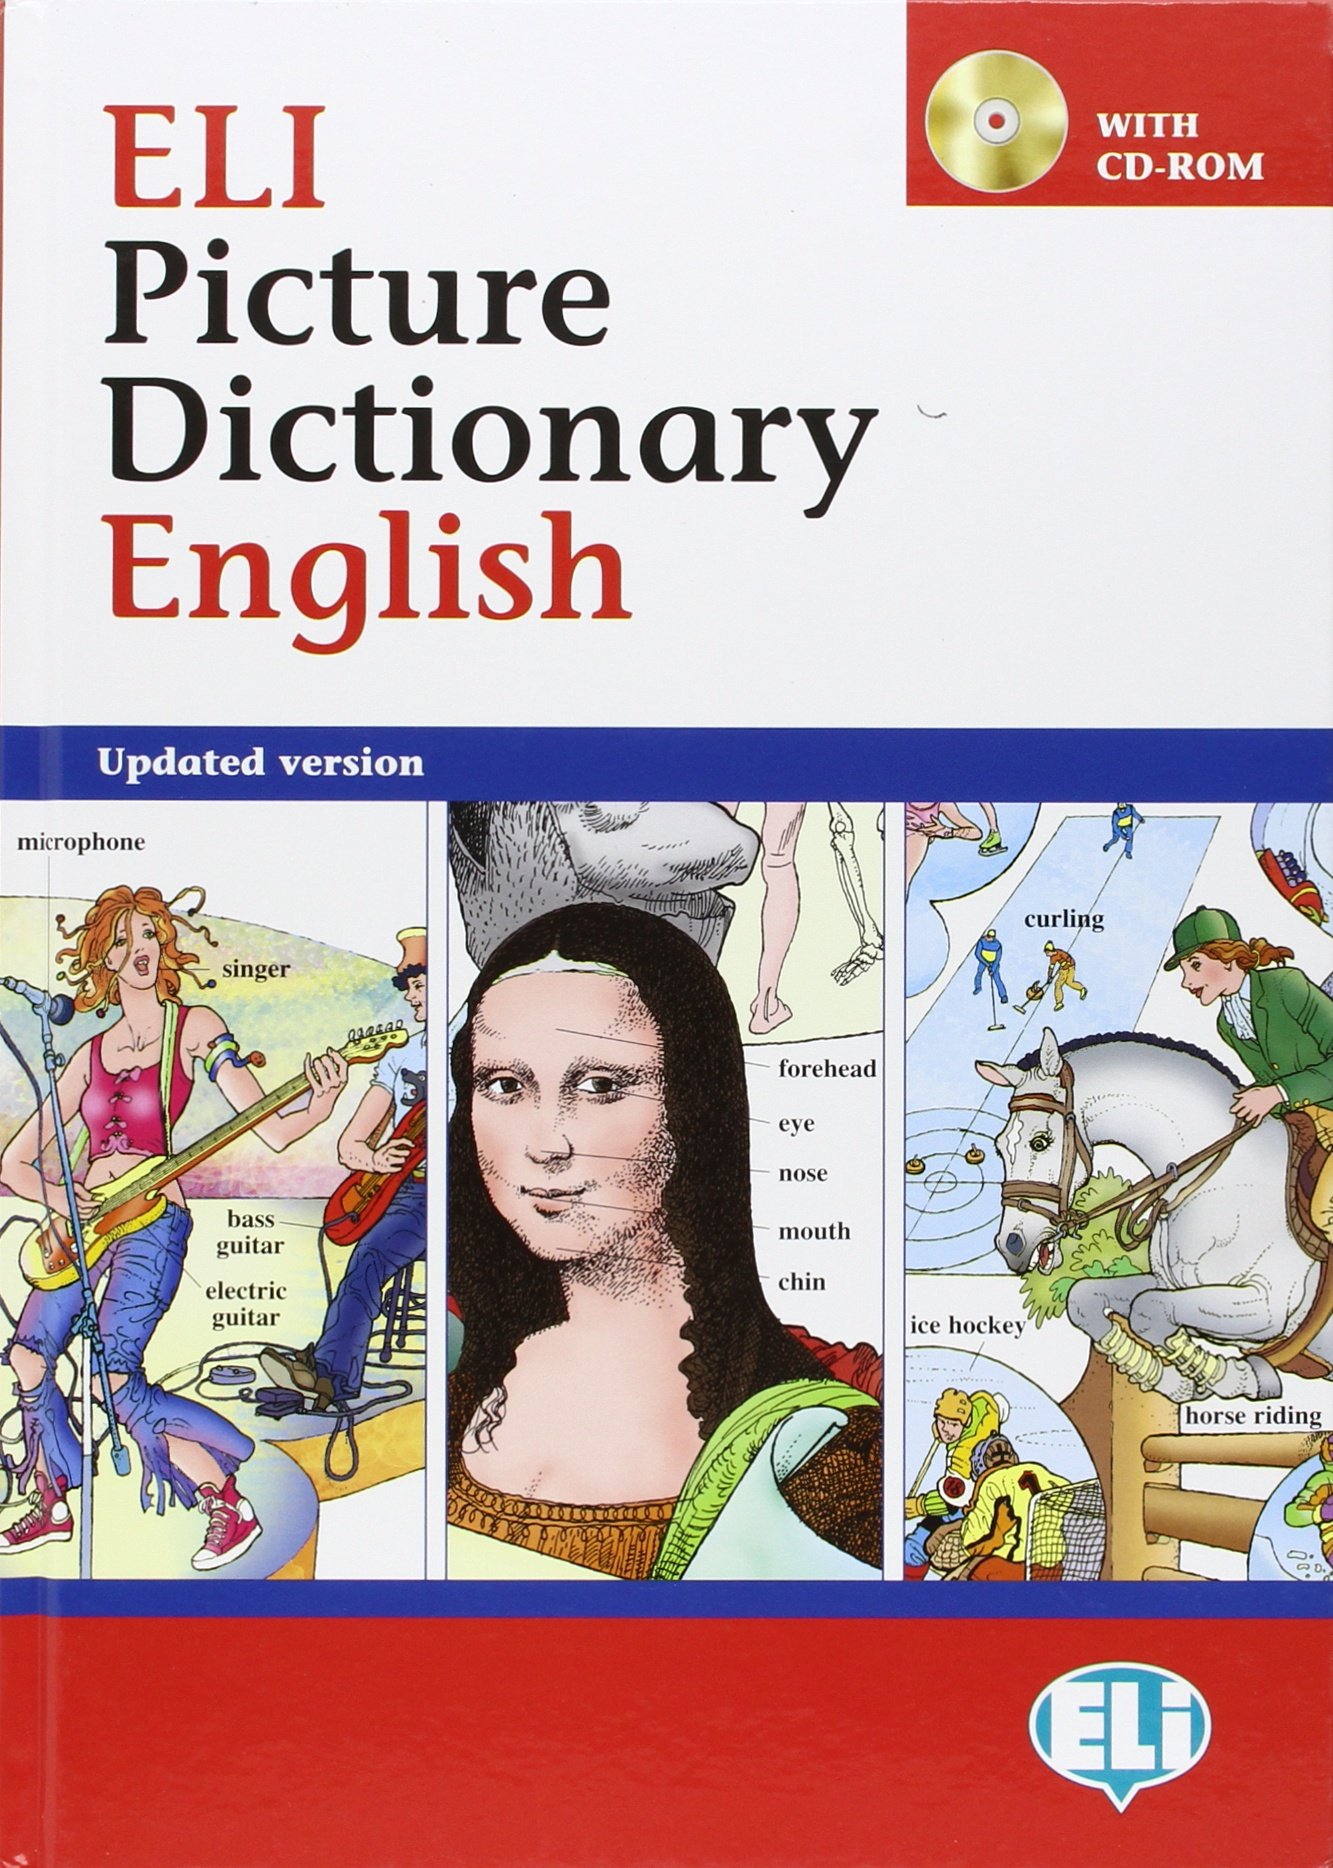 ELI PICTURE DICTIONARY English New ED + CD-ROM 